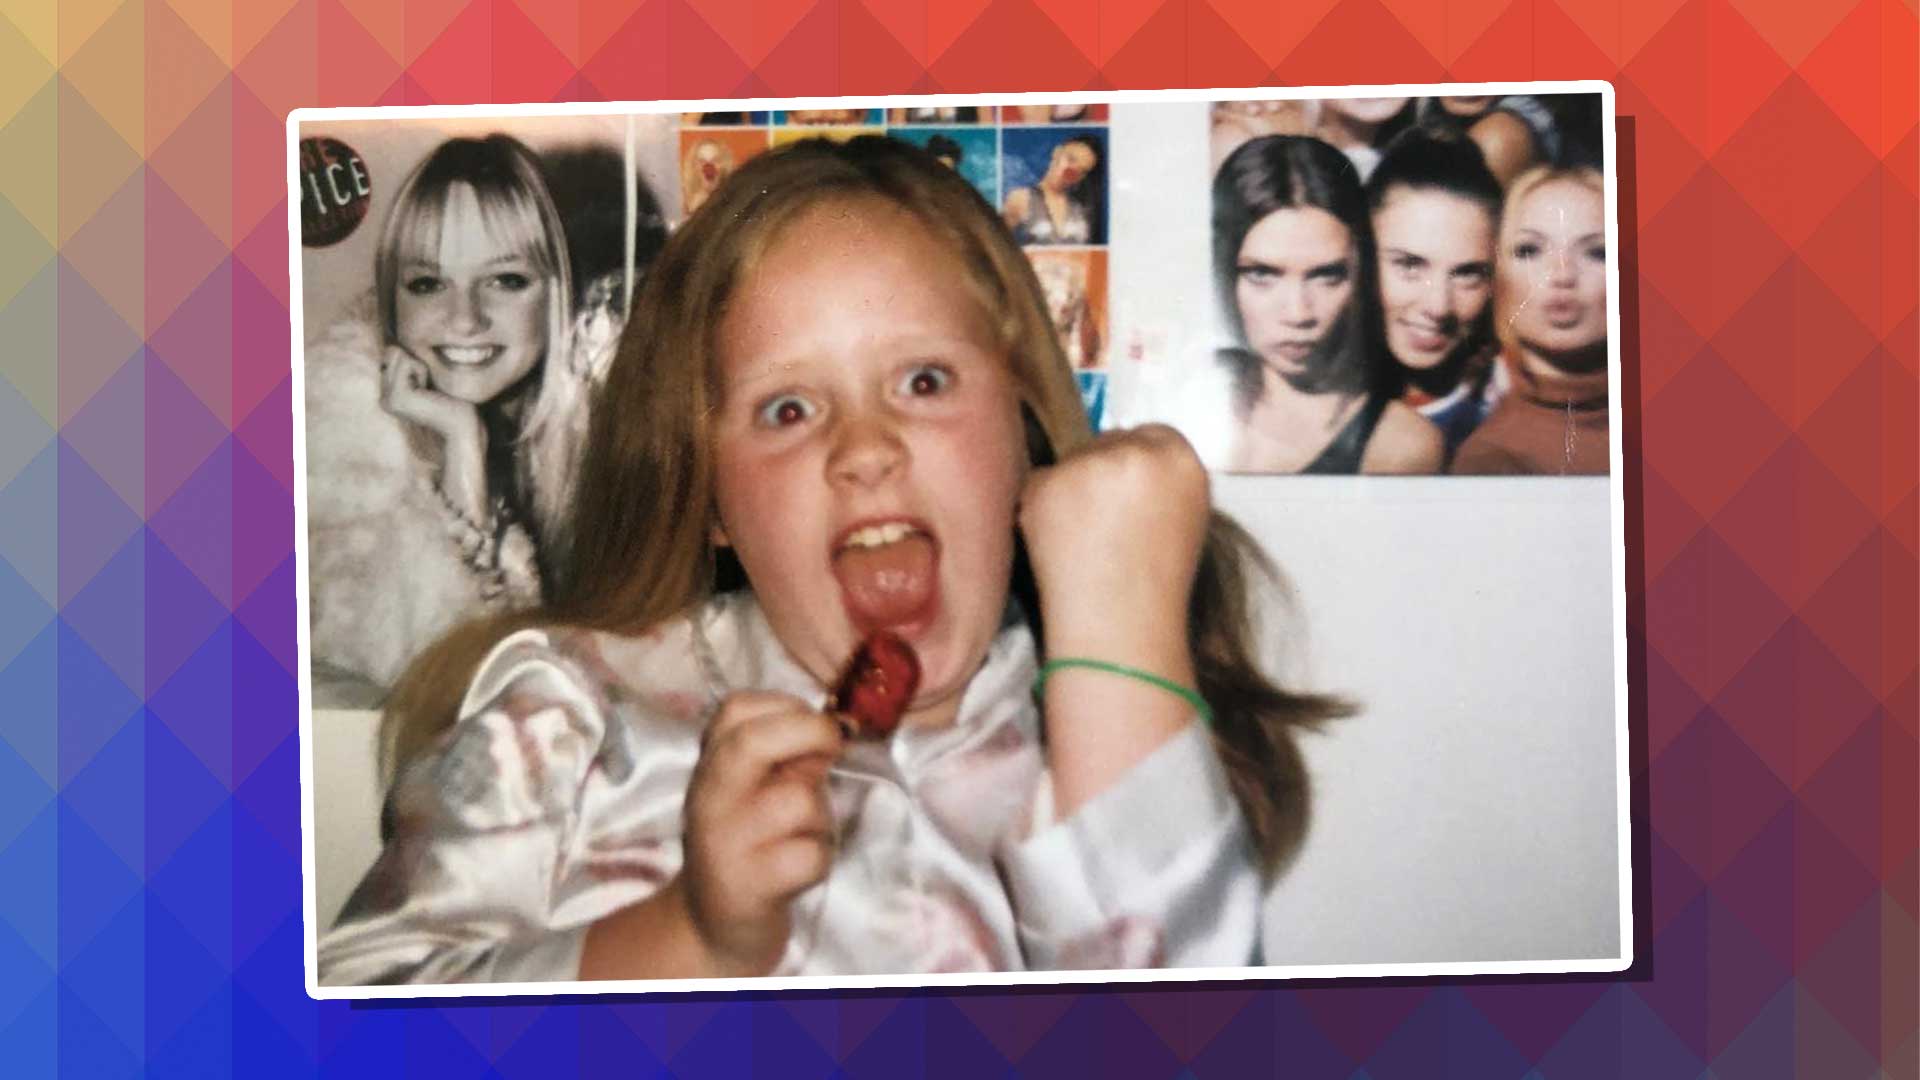 A young Spice Girls fan